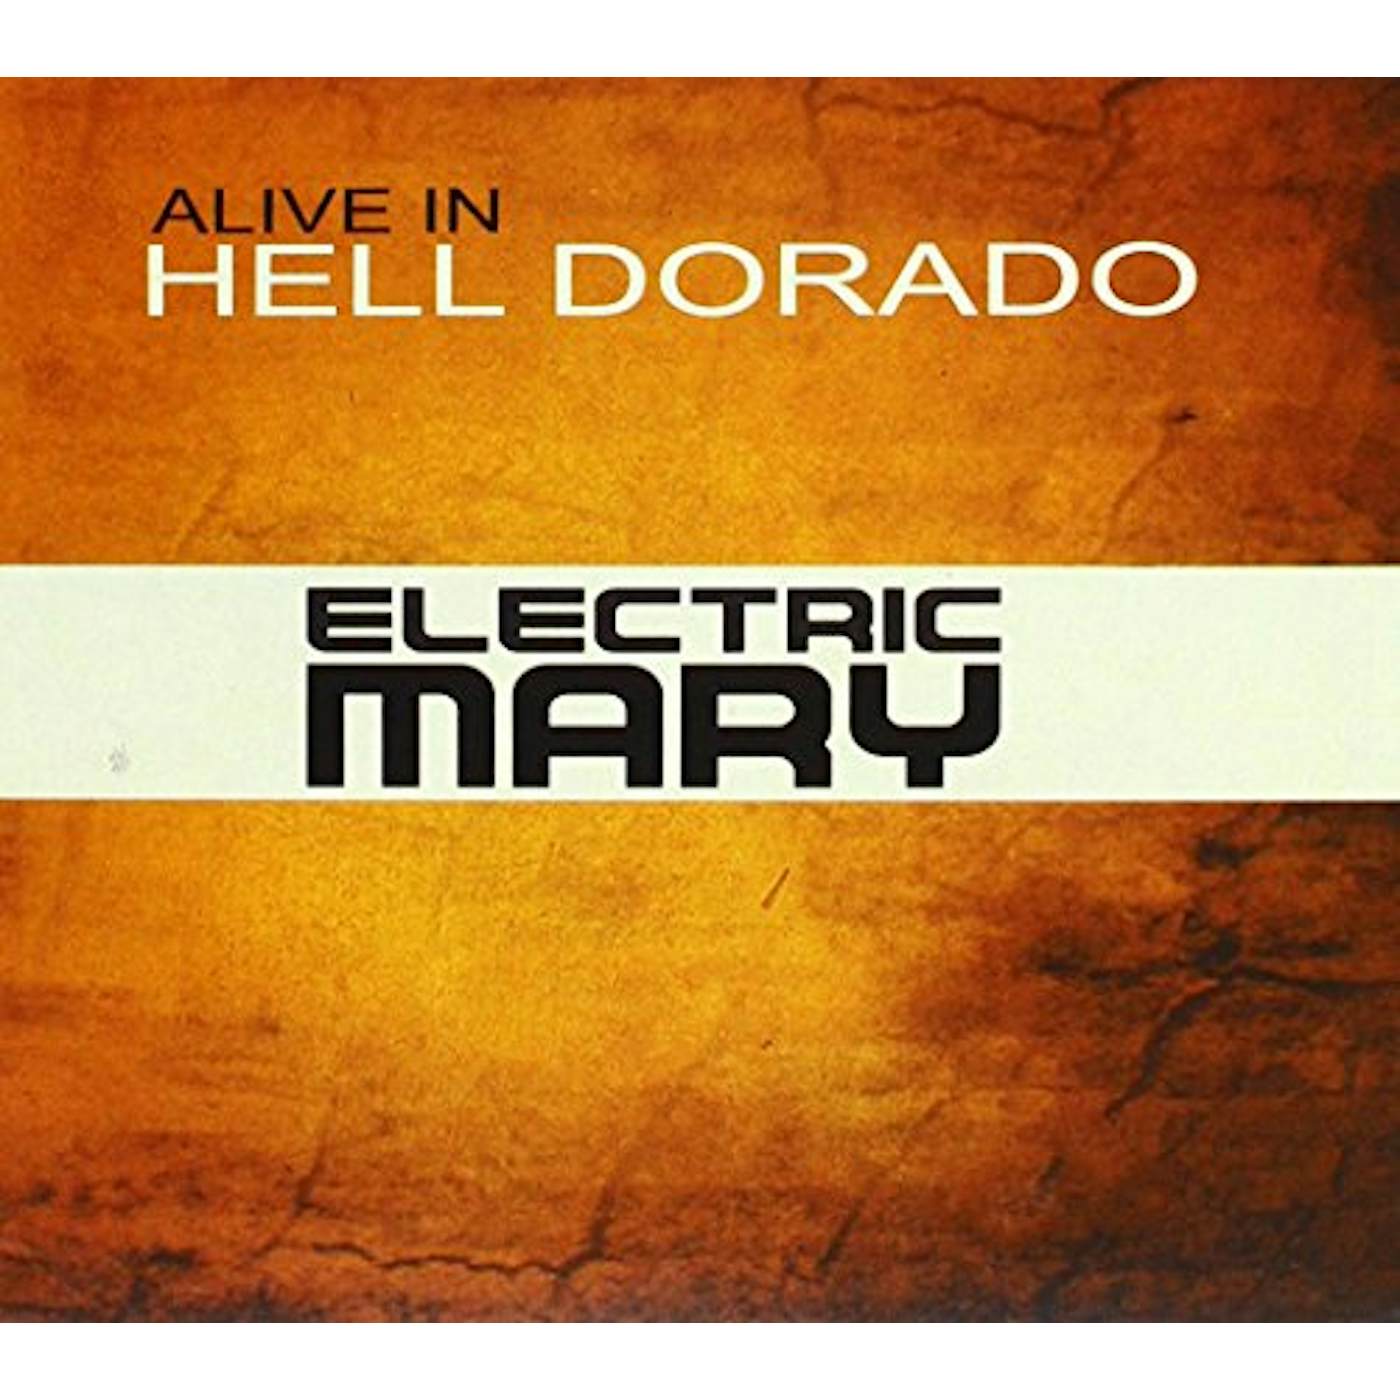 Electric Mary ALIVE IN HELL DORADO CD